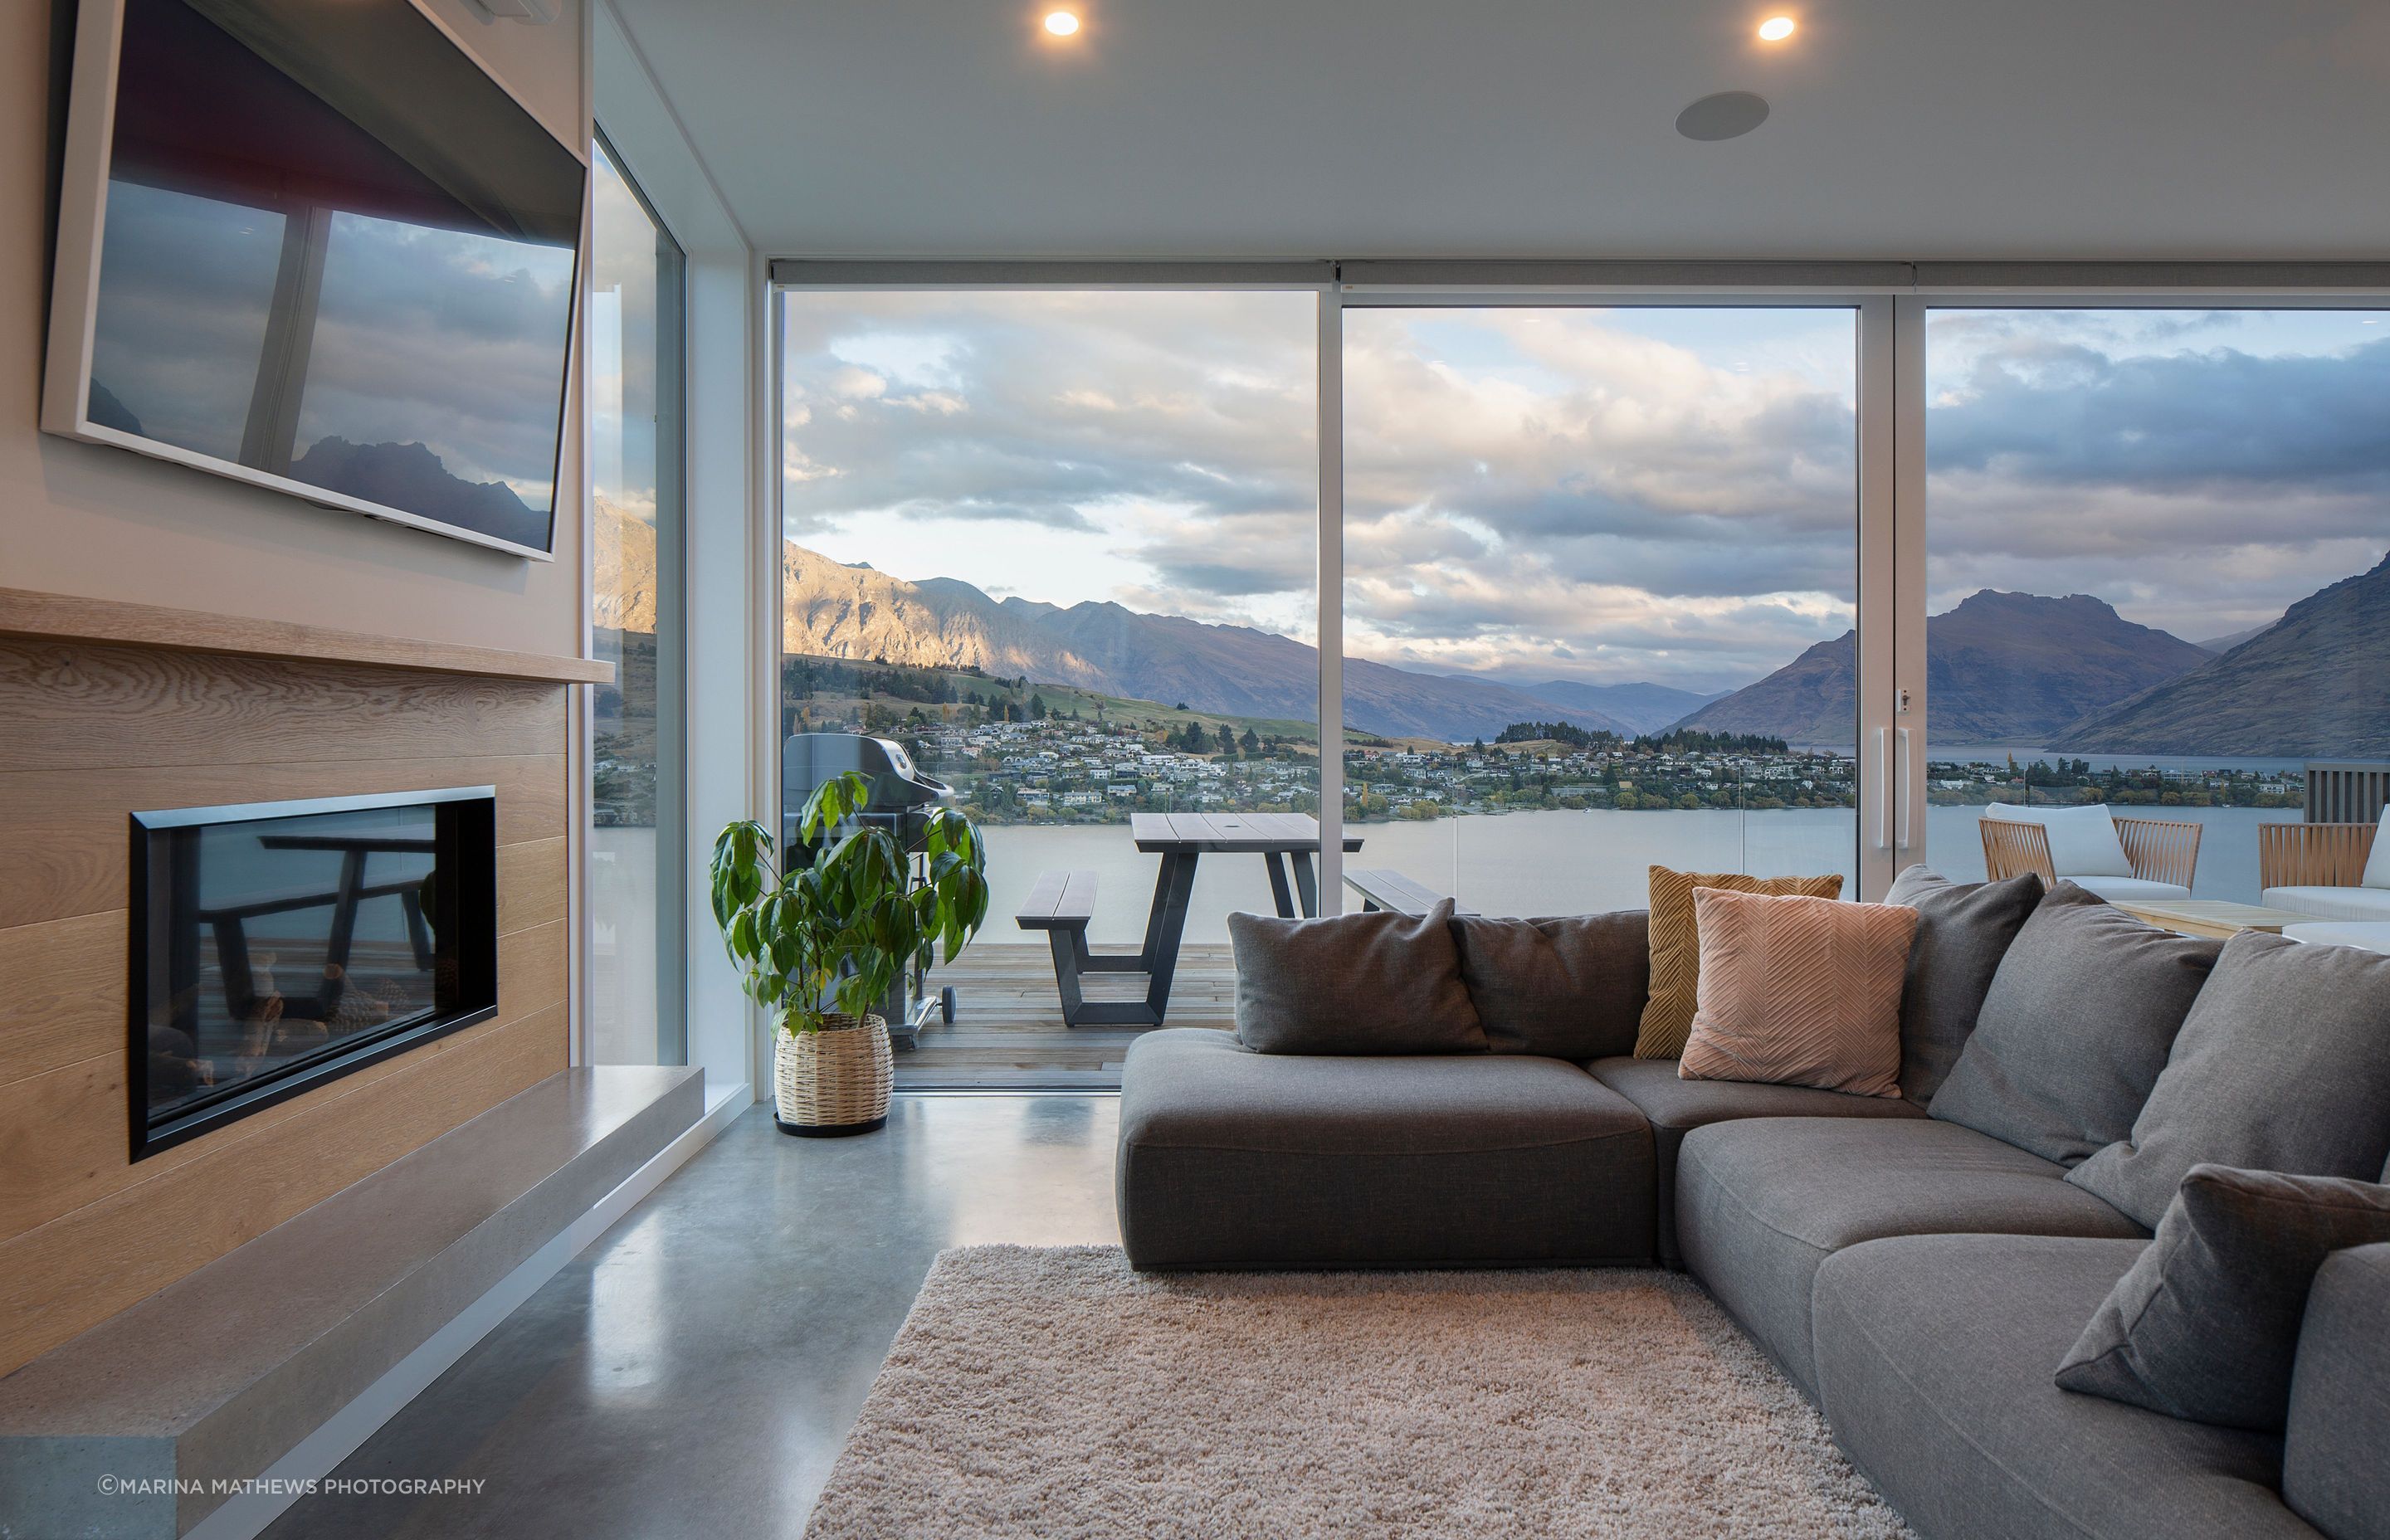 Expansive glazing opens out to views of the Remarkables beyond